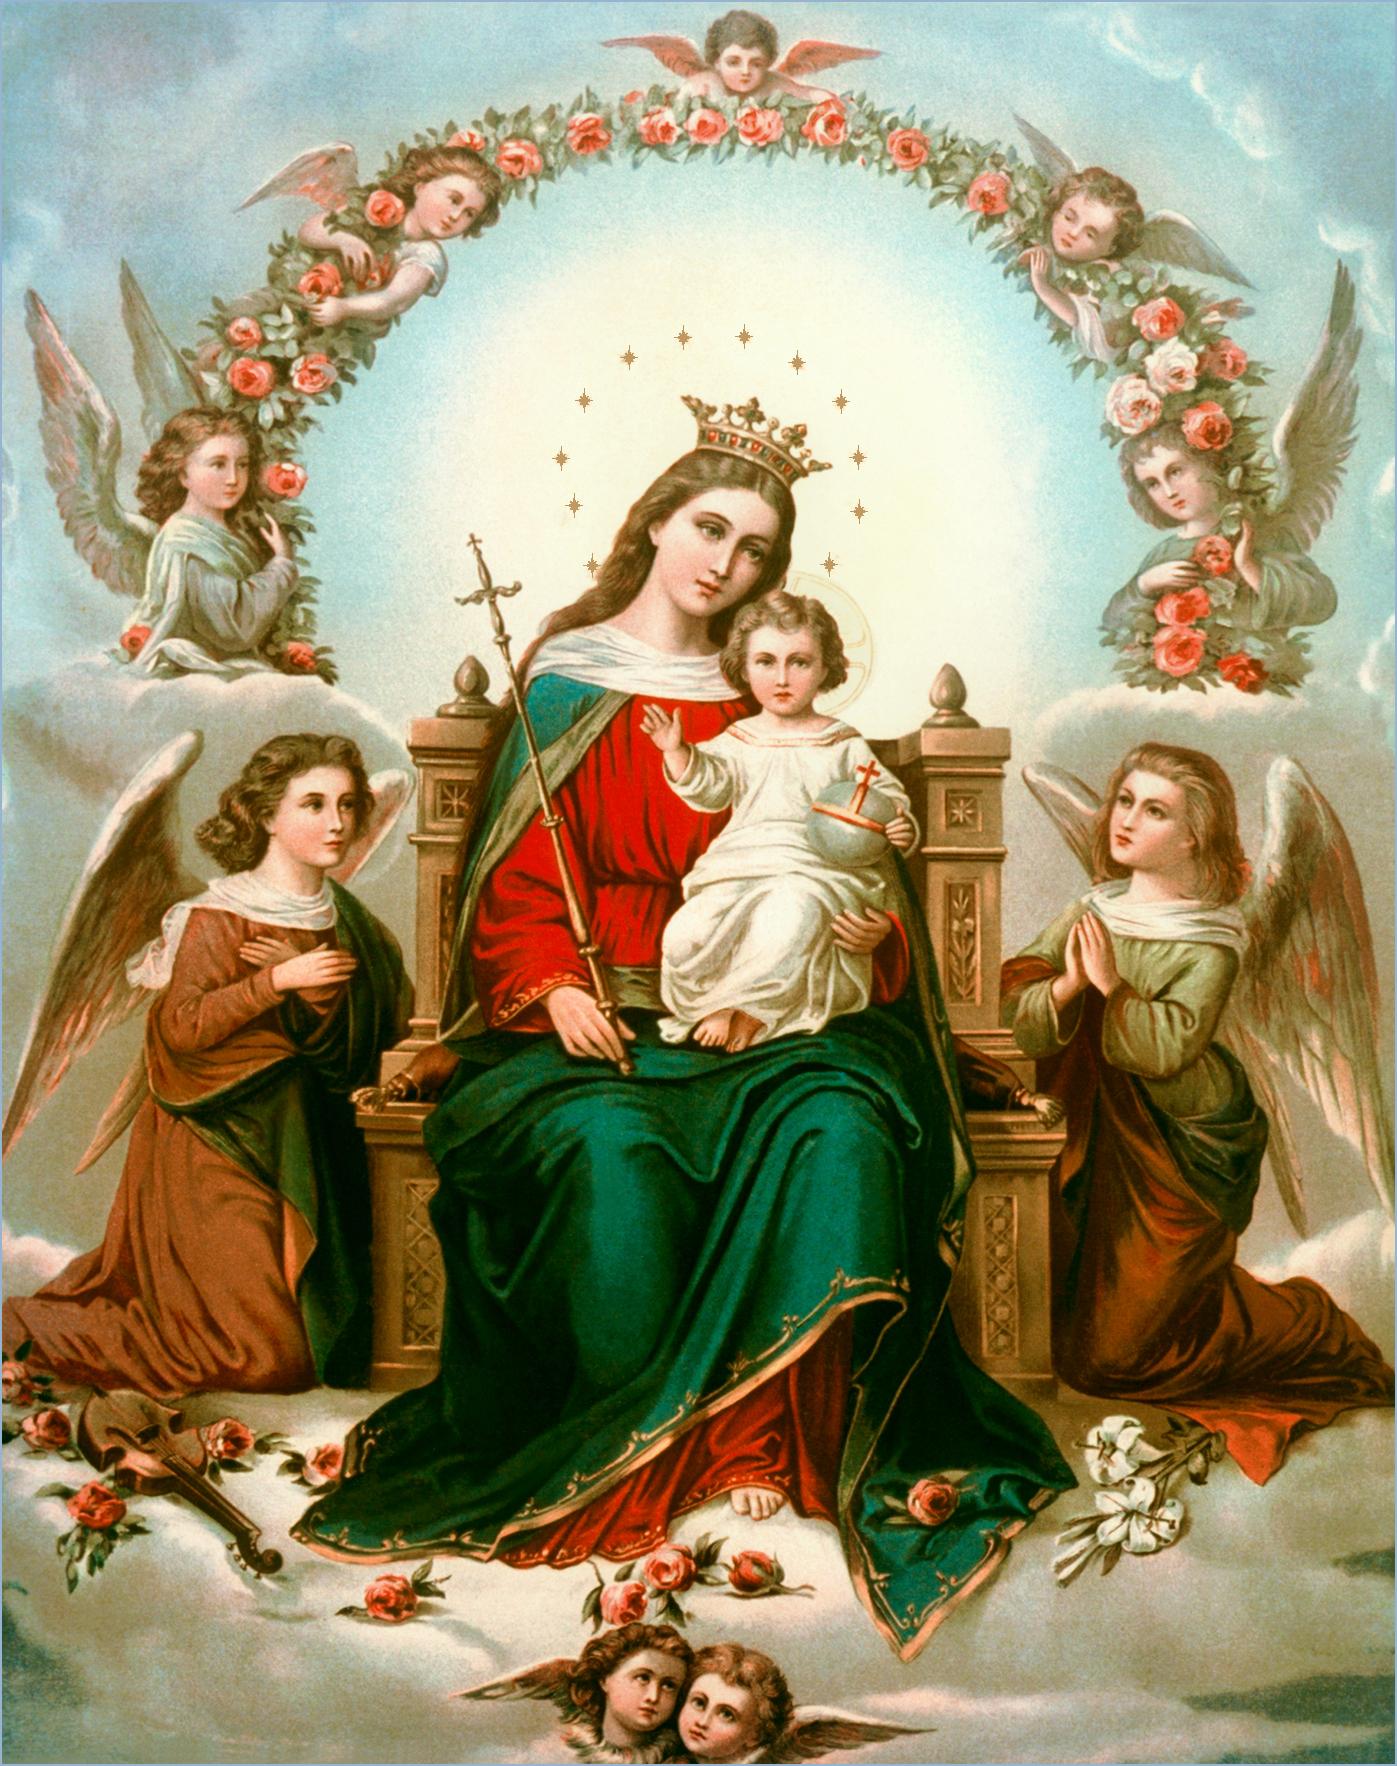 Jesus And Mary Wallpaper, image collections of wallpaper